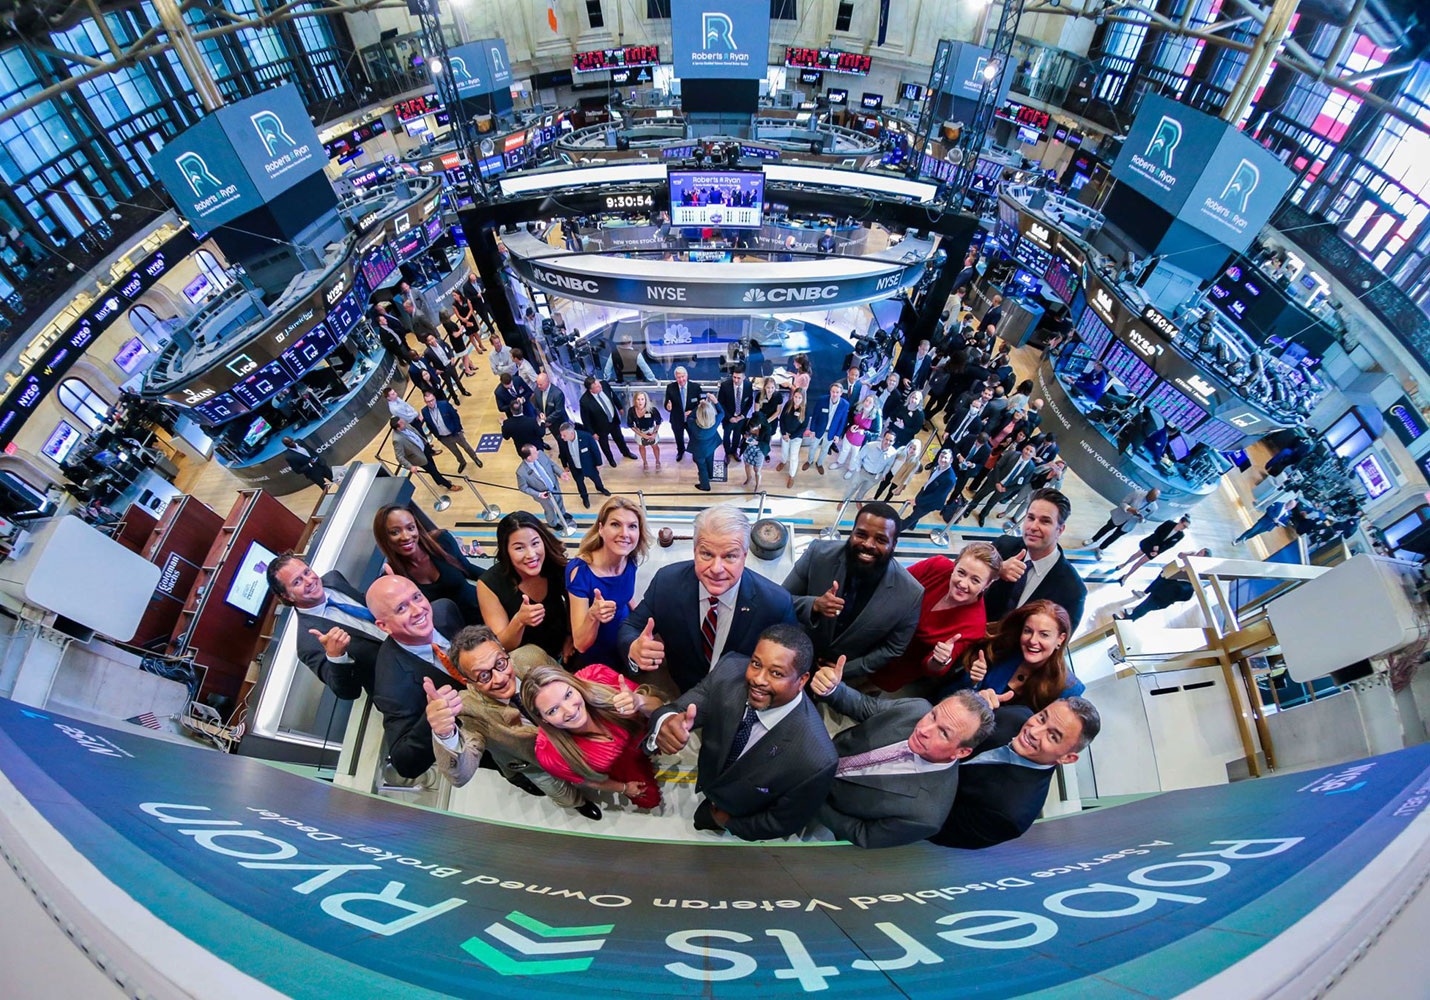 Roberts and Ryan rings the NYSE opening bell